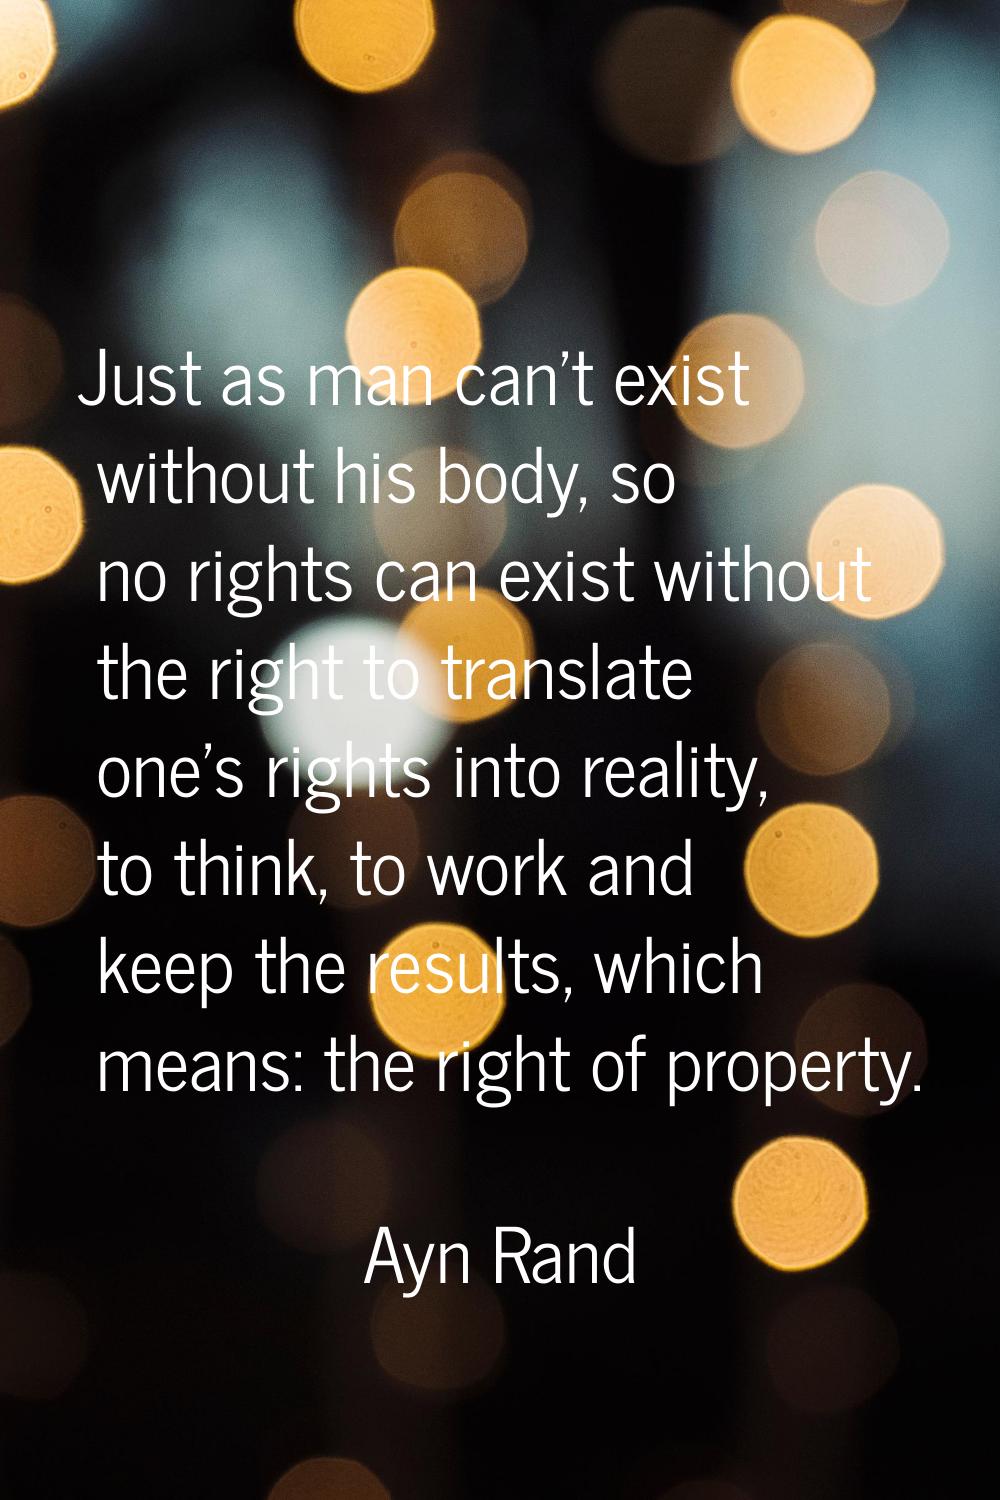 Just as man can't exist without his body, so no rights can exist without the right to translate one